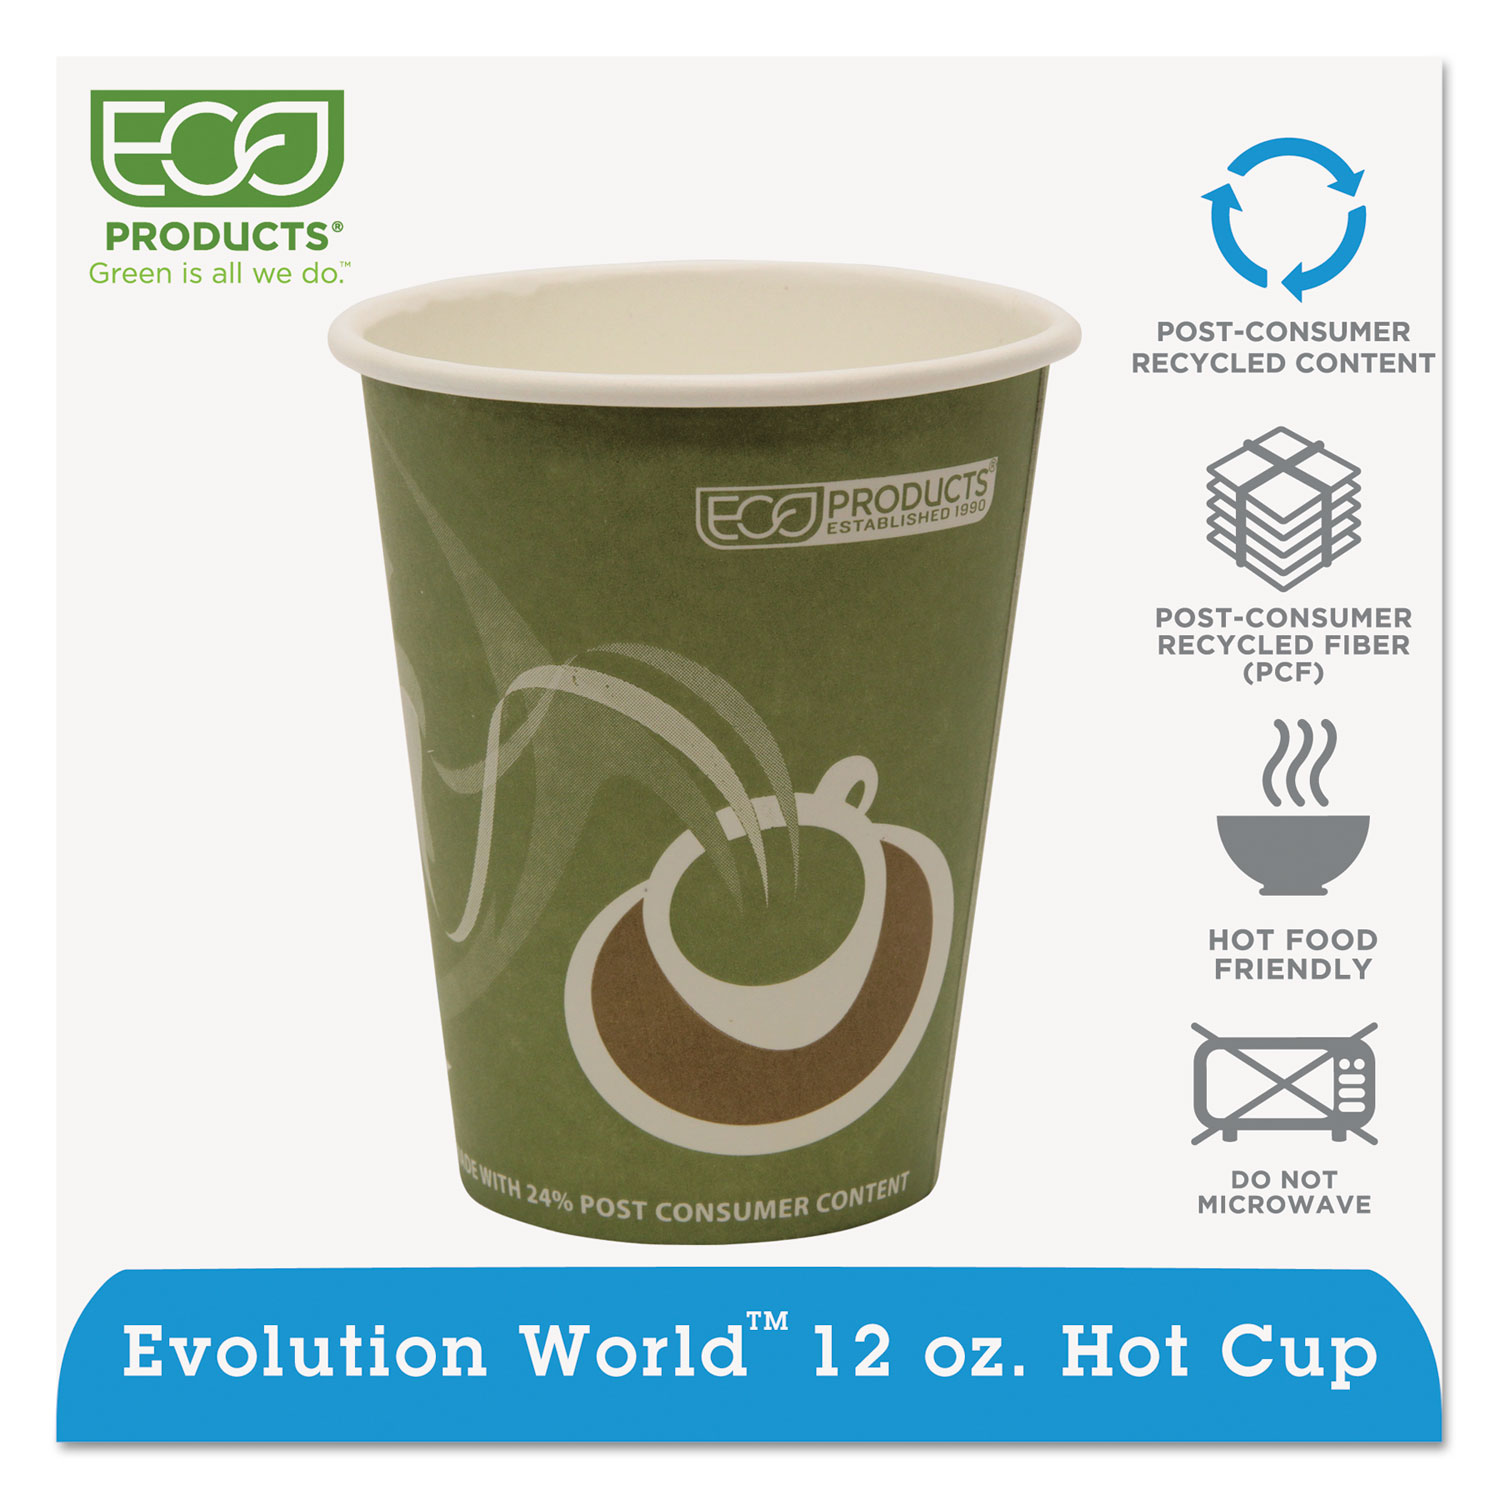  Eco-Products EP-BRHC12-EW Evolution World 24% Recycled Content Hot Cups - 12oz., 50/PK, 20 PK/CT (ECOEPBRHC12EW) 